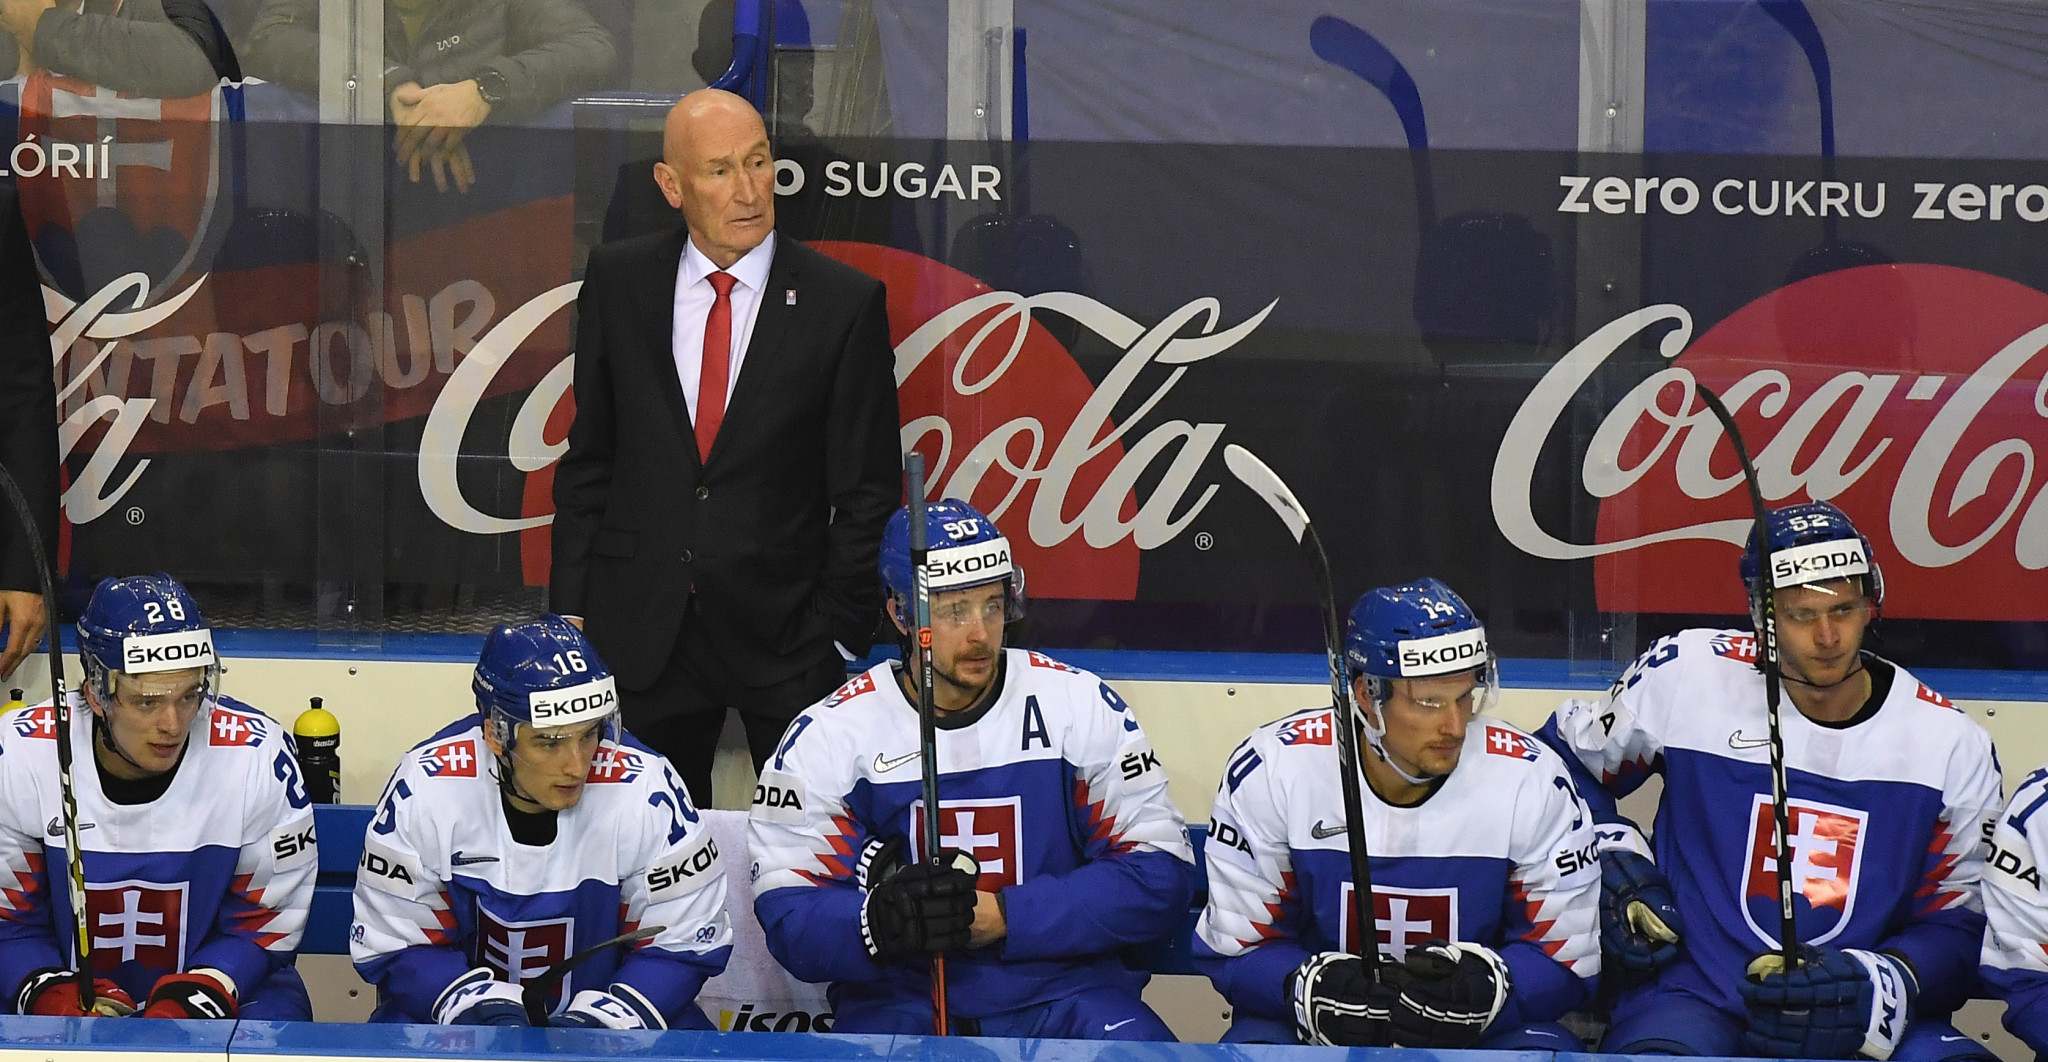 The Canadian coach will lead Slovakia into the 2020 Ice Hockey World Championship in Switzerland ©Getty Images